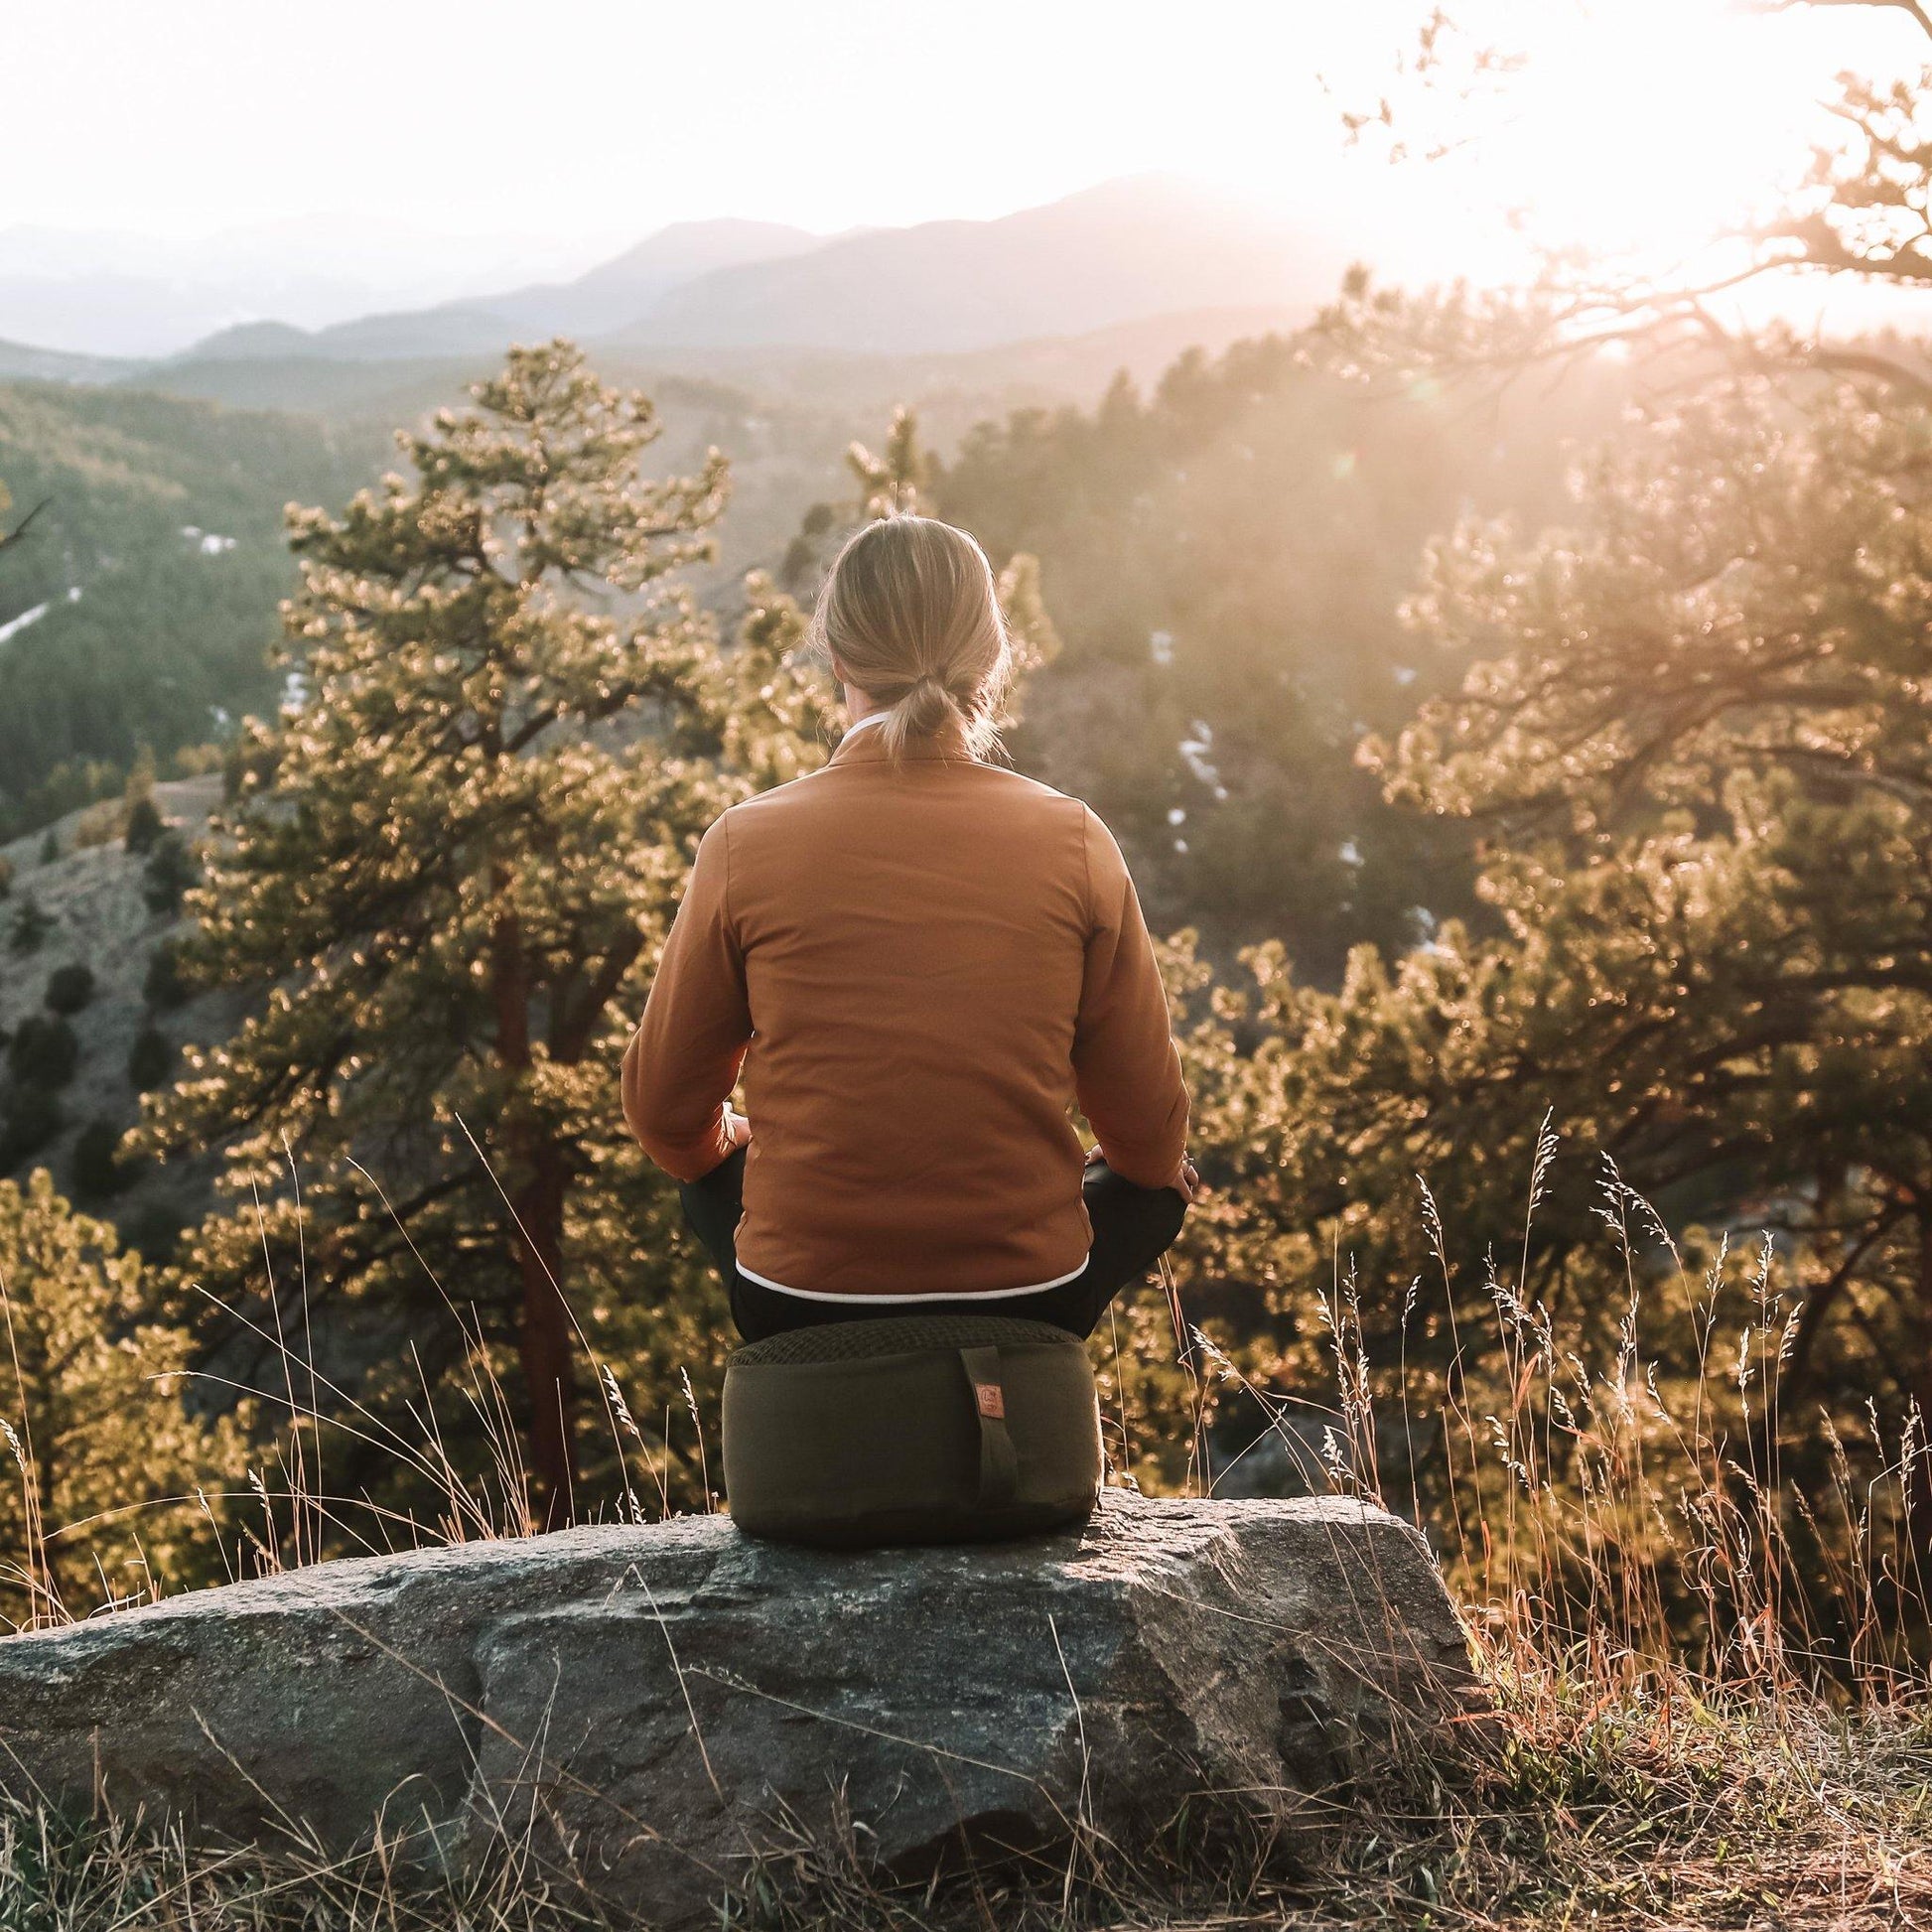 Woman meditating on an olive-colored zafu cushion with a beautiful mountain sunset in Colorado